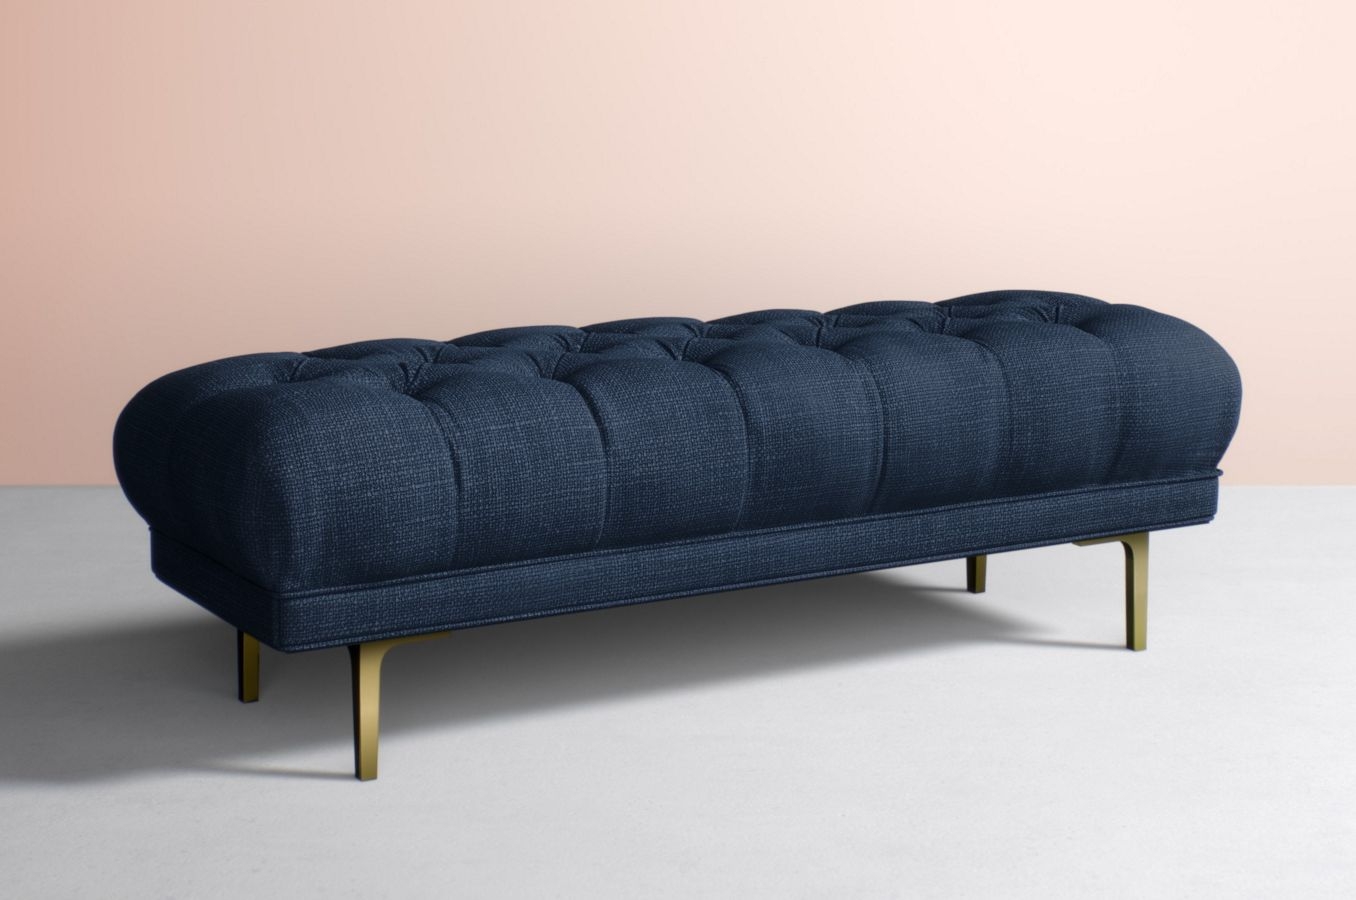 Mina Bench in Basketweave Linen Navy with Antique Brass Legs - Image 0